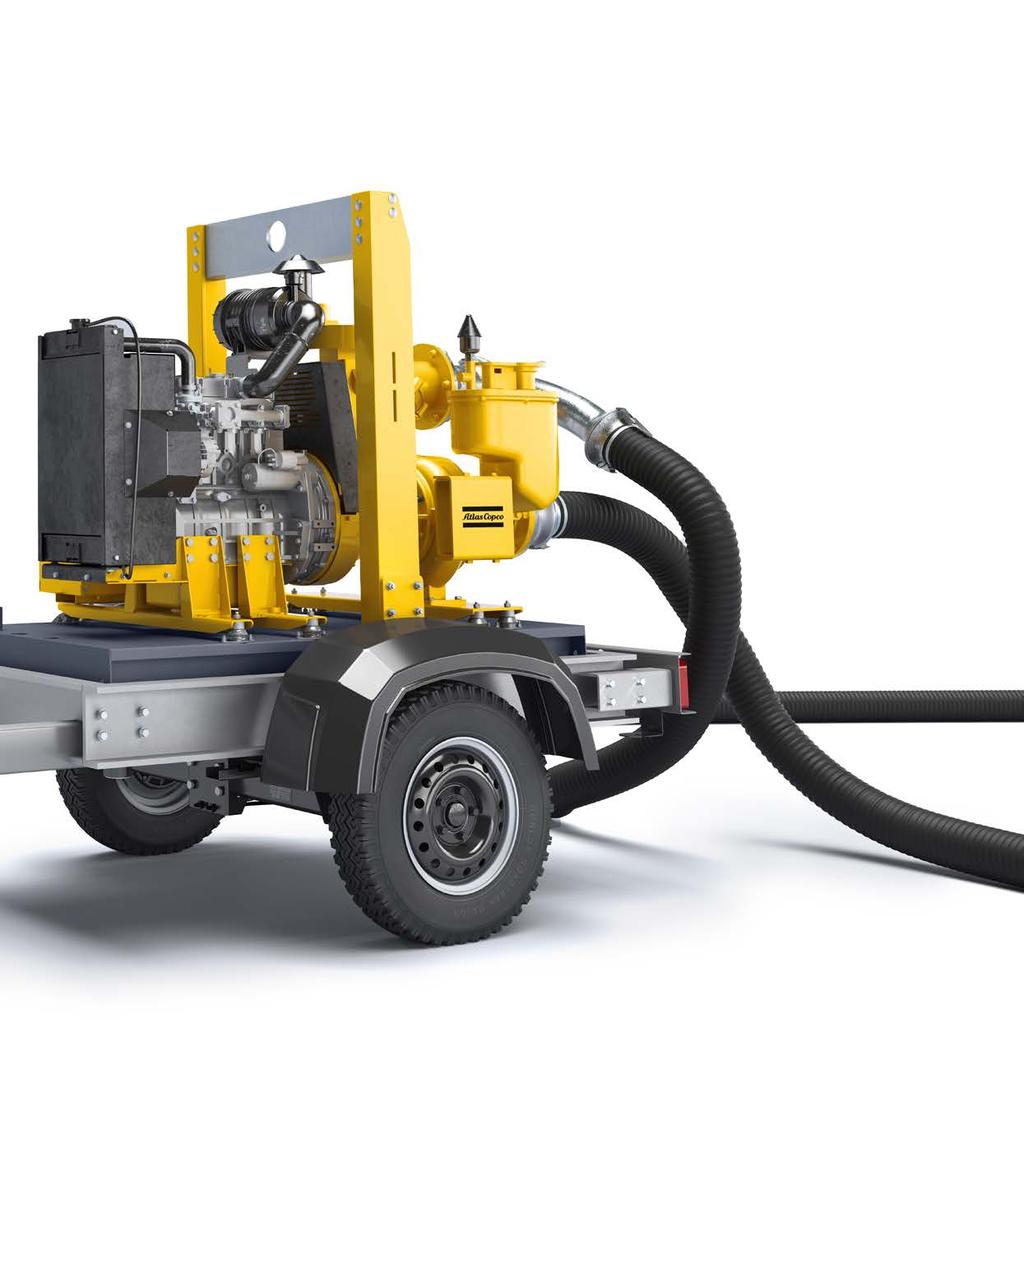 LIFTING BEAM Comes as standard with all configurations. IG EFFICIENCY YDRAULIC END Low fuel consumption. WEN IT COMES TO PUMPS, WE FOCUS ON FIVE KEY CRITERIA: COMPACT Made to go where you need to go.